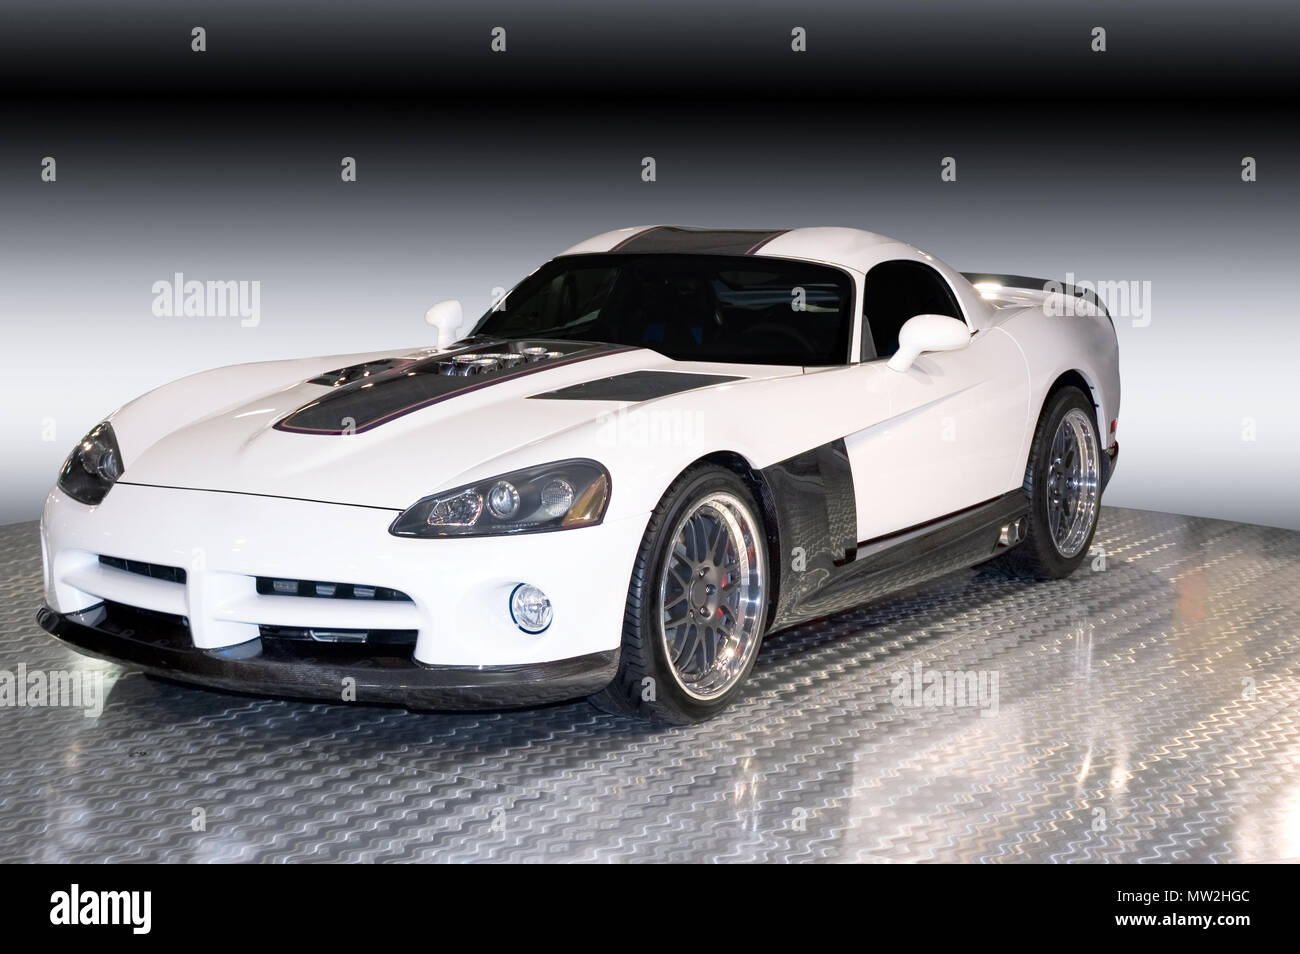 A custom Dodge Viper isolated on a gradient black and white background. Clipping path of background included. Many more car photos inmy gallery. Stock Photo